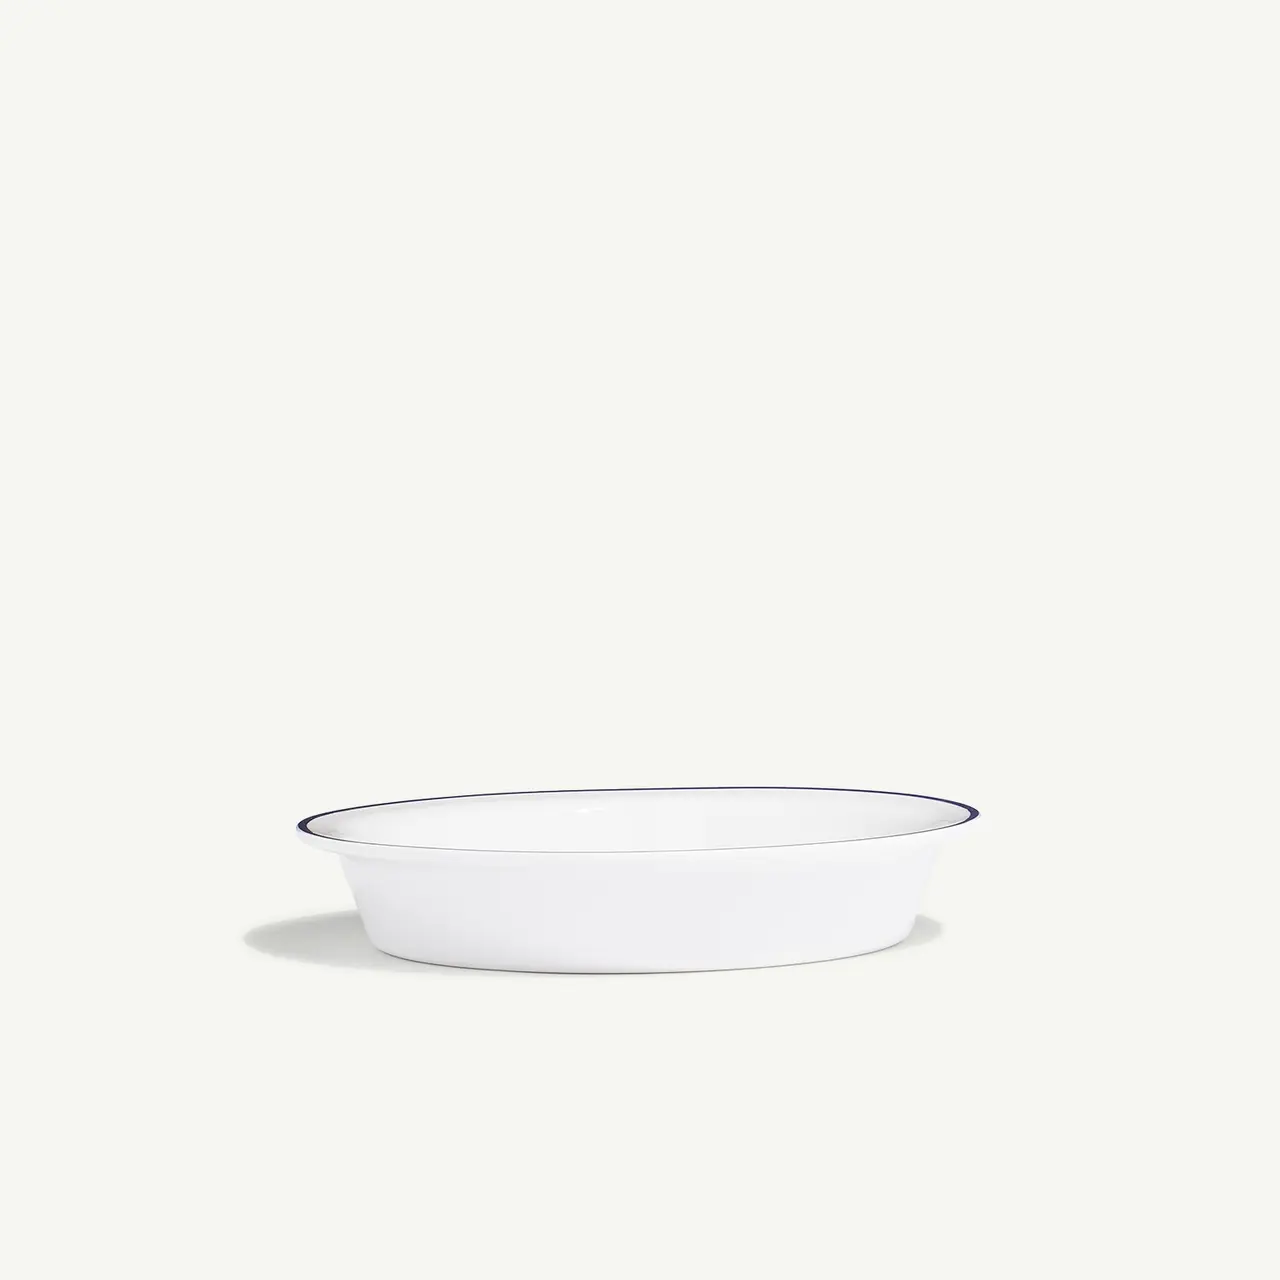 A white enamel bowl with a blue rim sits centered against a plain background.